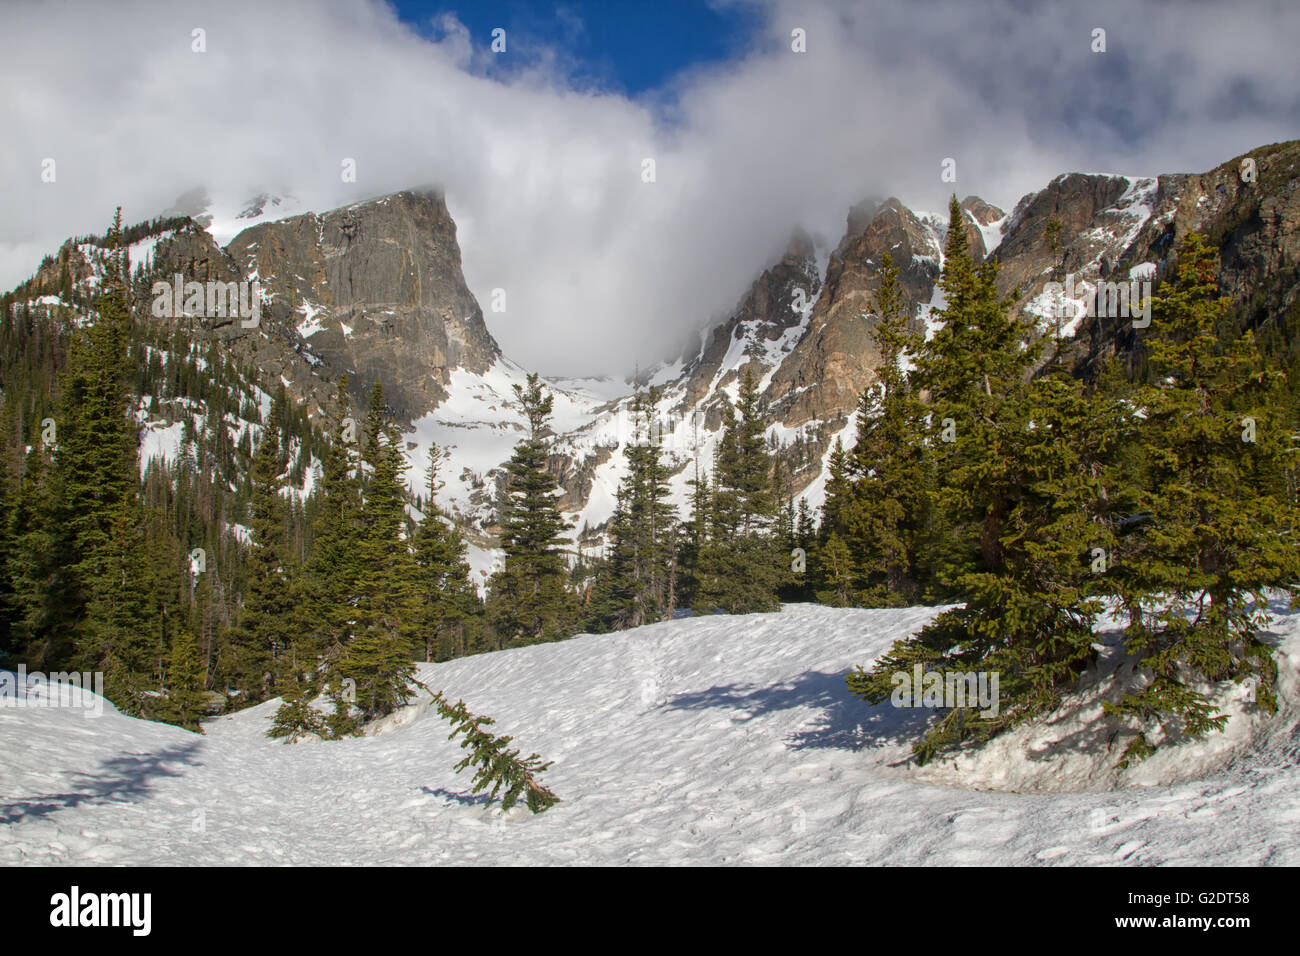 Hallett Peak and Flattop tower over the snowy landscape in Rocky Mountain National Park Stock Photo